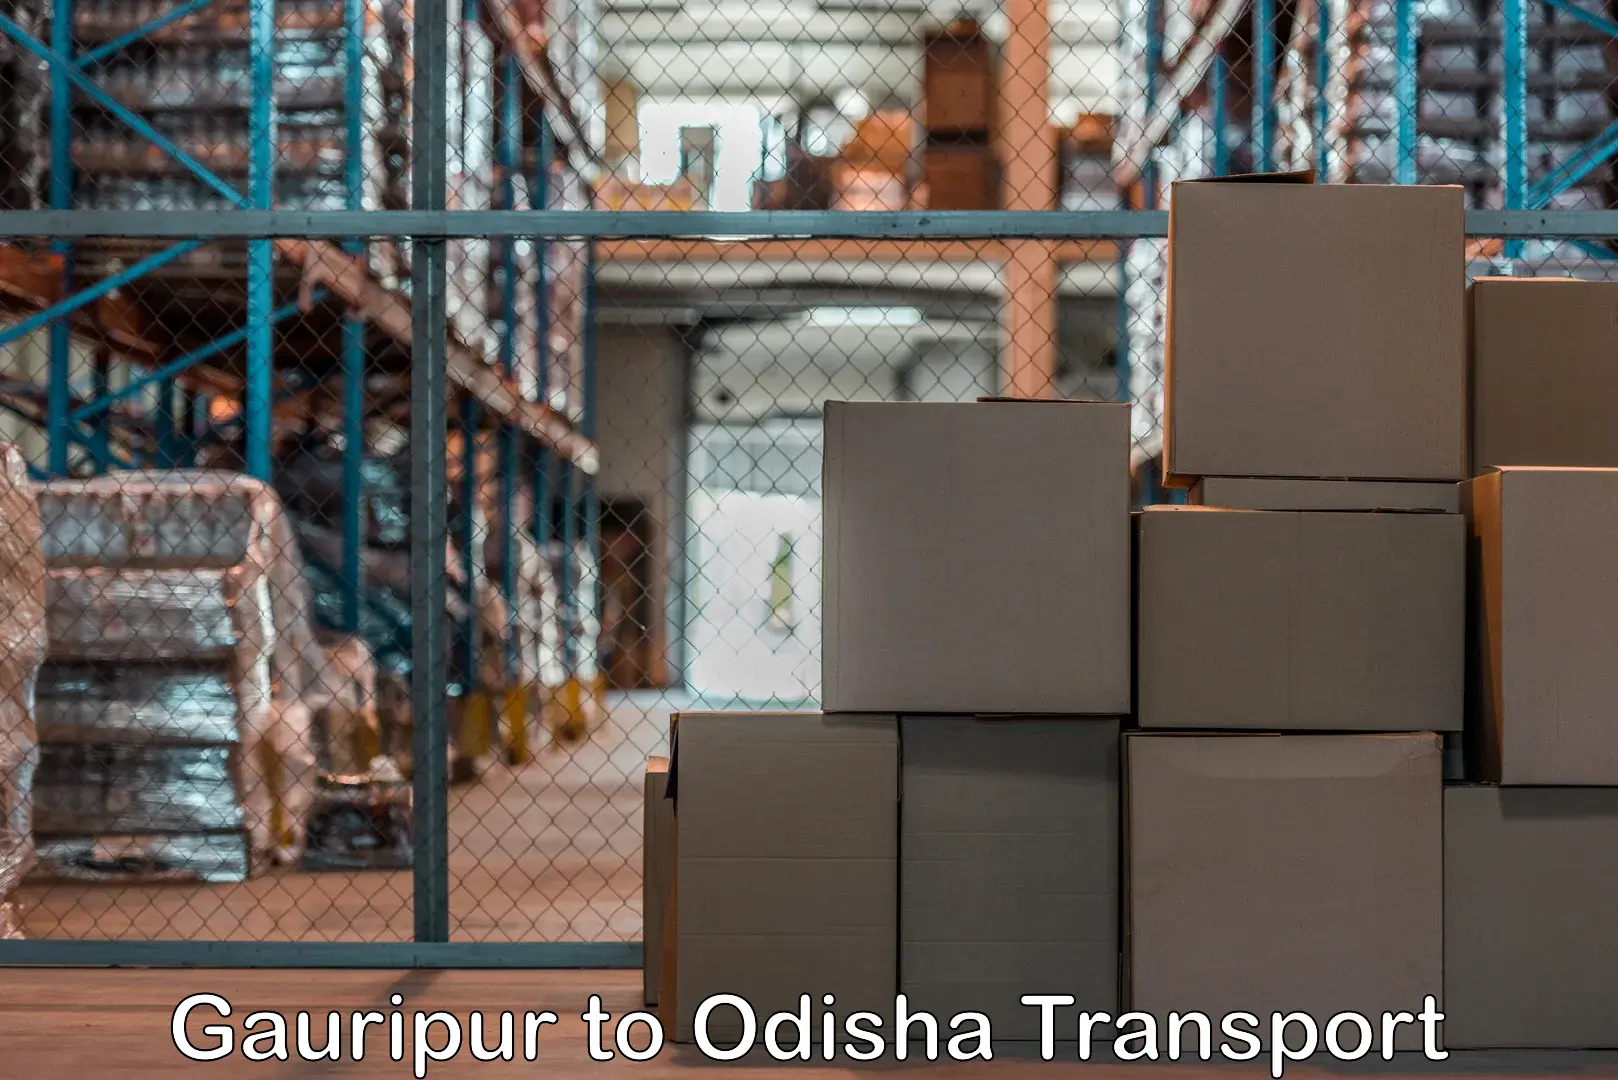 Truck transport companies in India Gauripur to Kendrapara